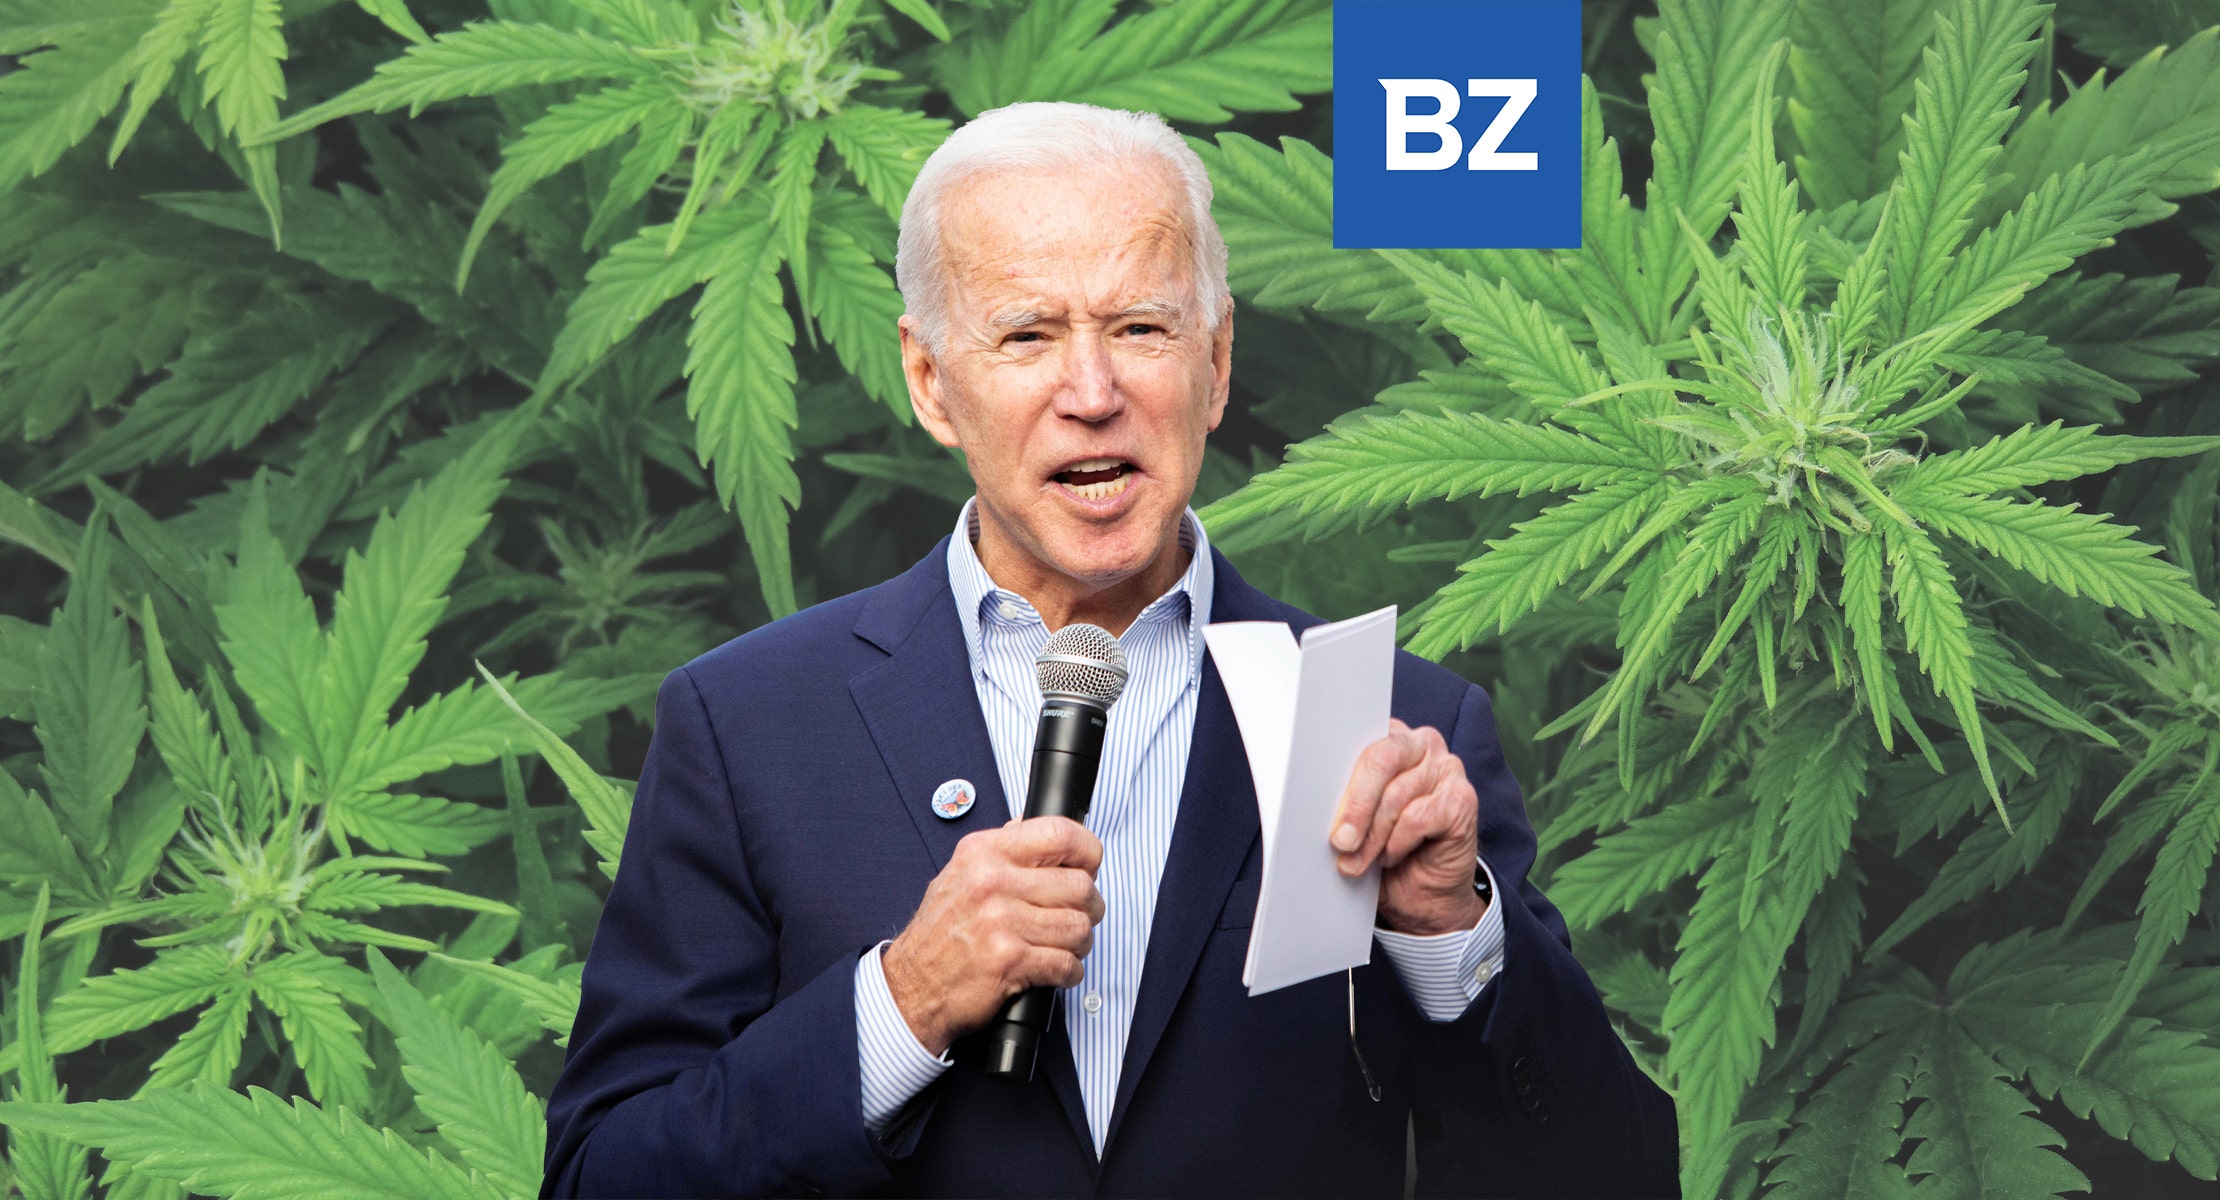 Senators Booker, Warren, Sanders And Others Urge Biden To Use His Power And Act On Cannabis Legalization